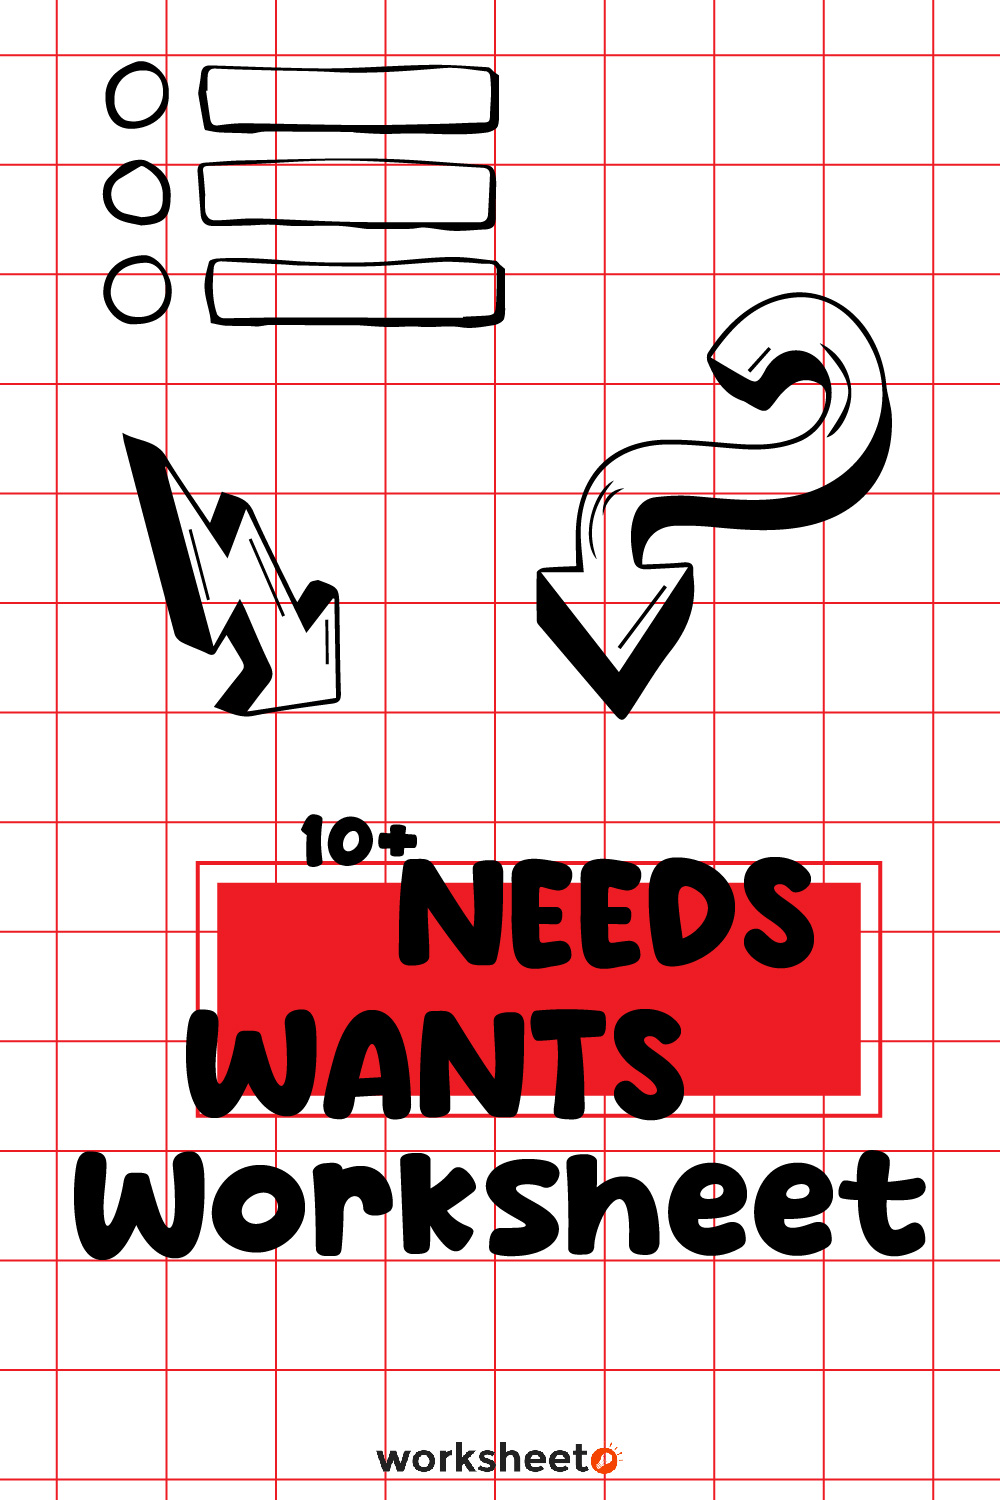 18 Images of Needs Wants Worksheet